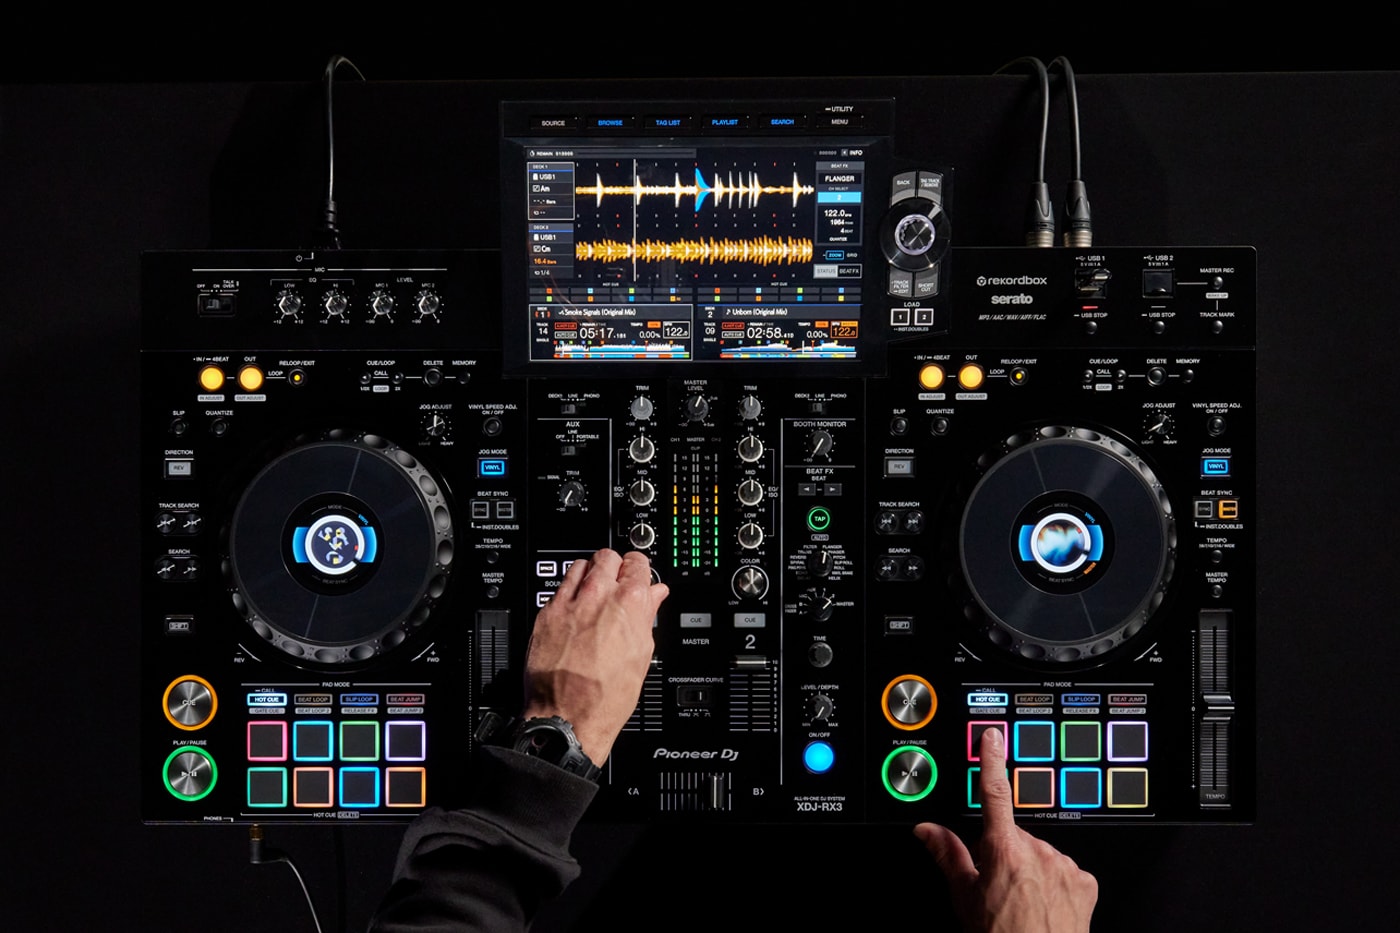 pioneer dj xdj rx3 controller deck release info color on job wheels 10.1 inch touch screen lcd touch preview 1999 usd mobiel small venue controller mixer deck serato rekordbox release info 